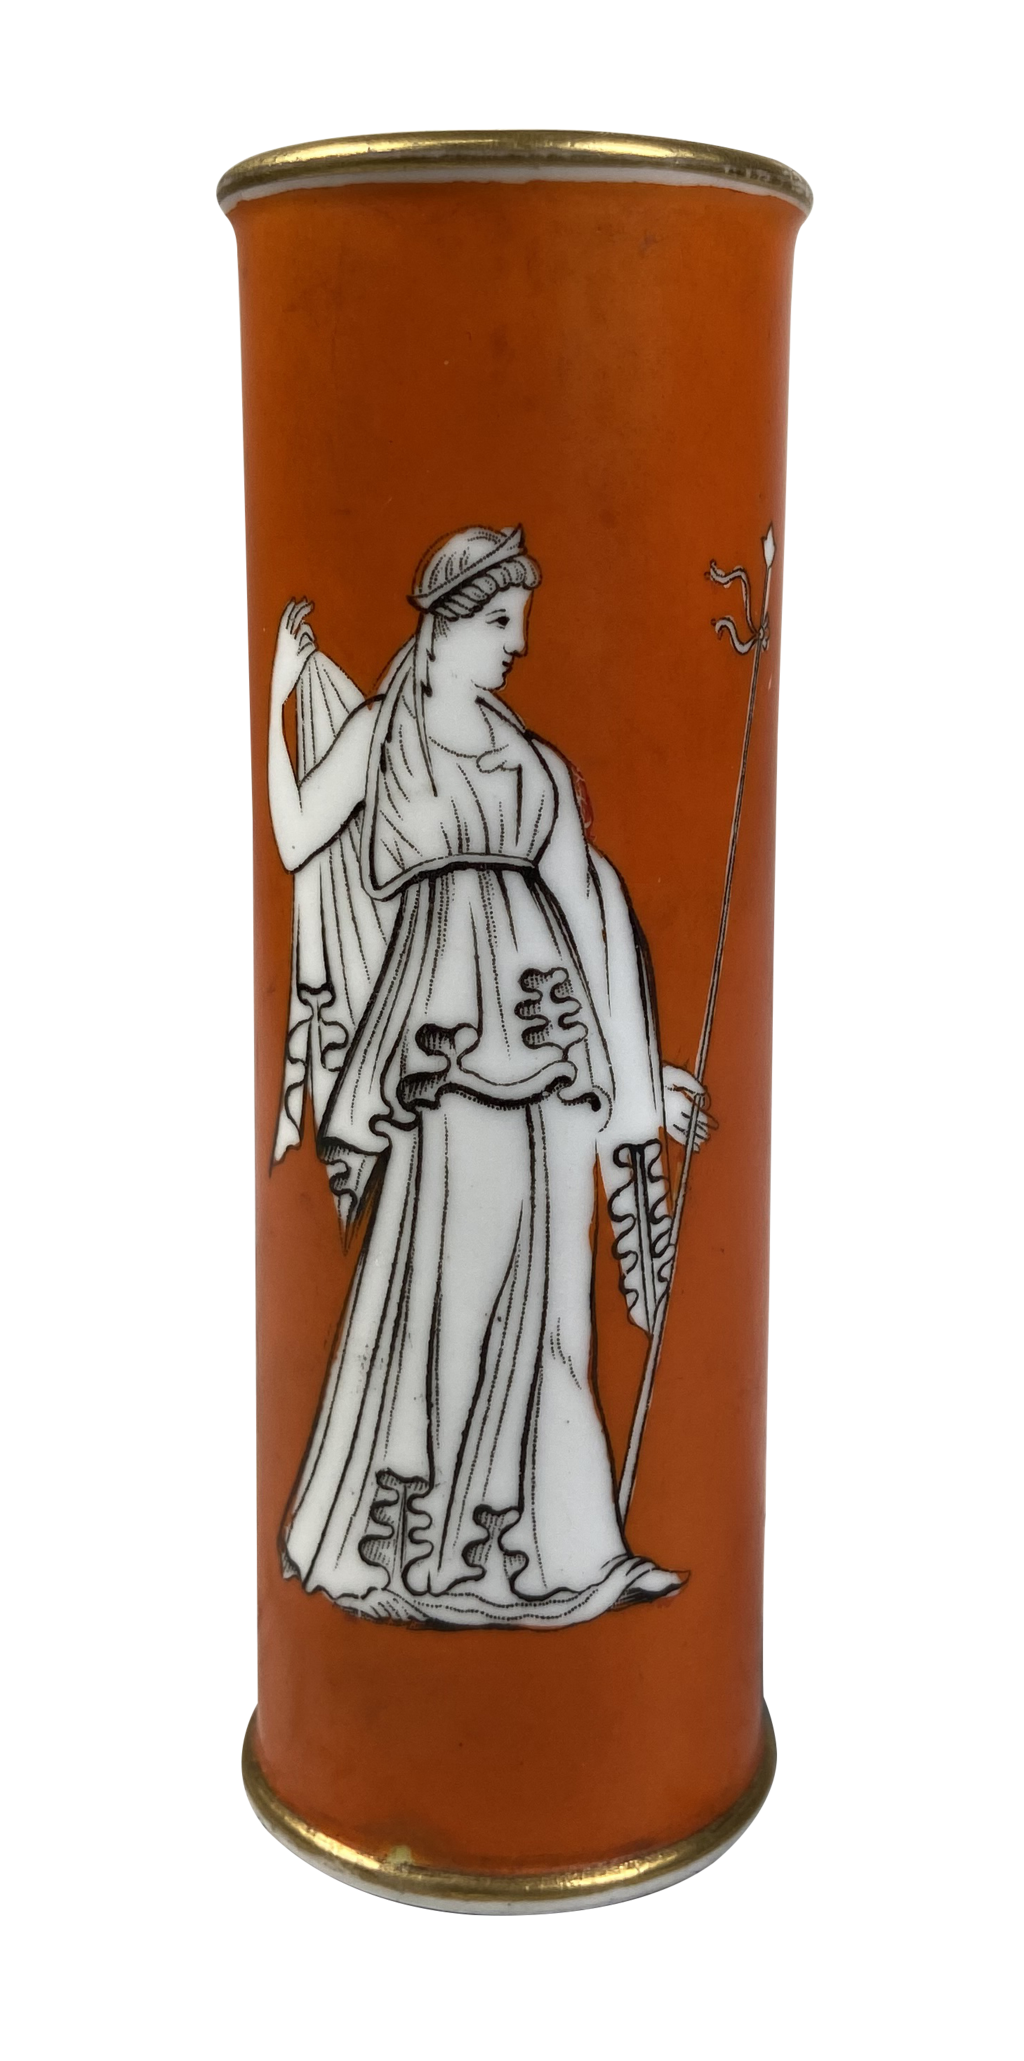 Prattware Spill Vase with Neo-Classical Figures